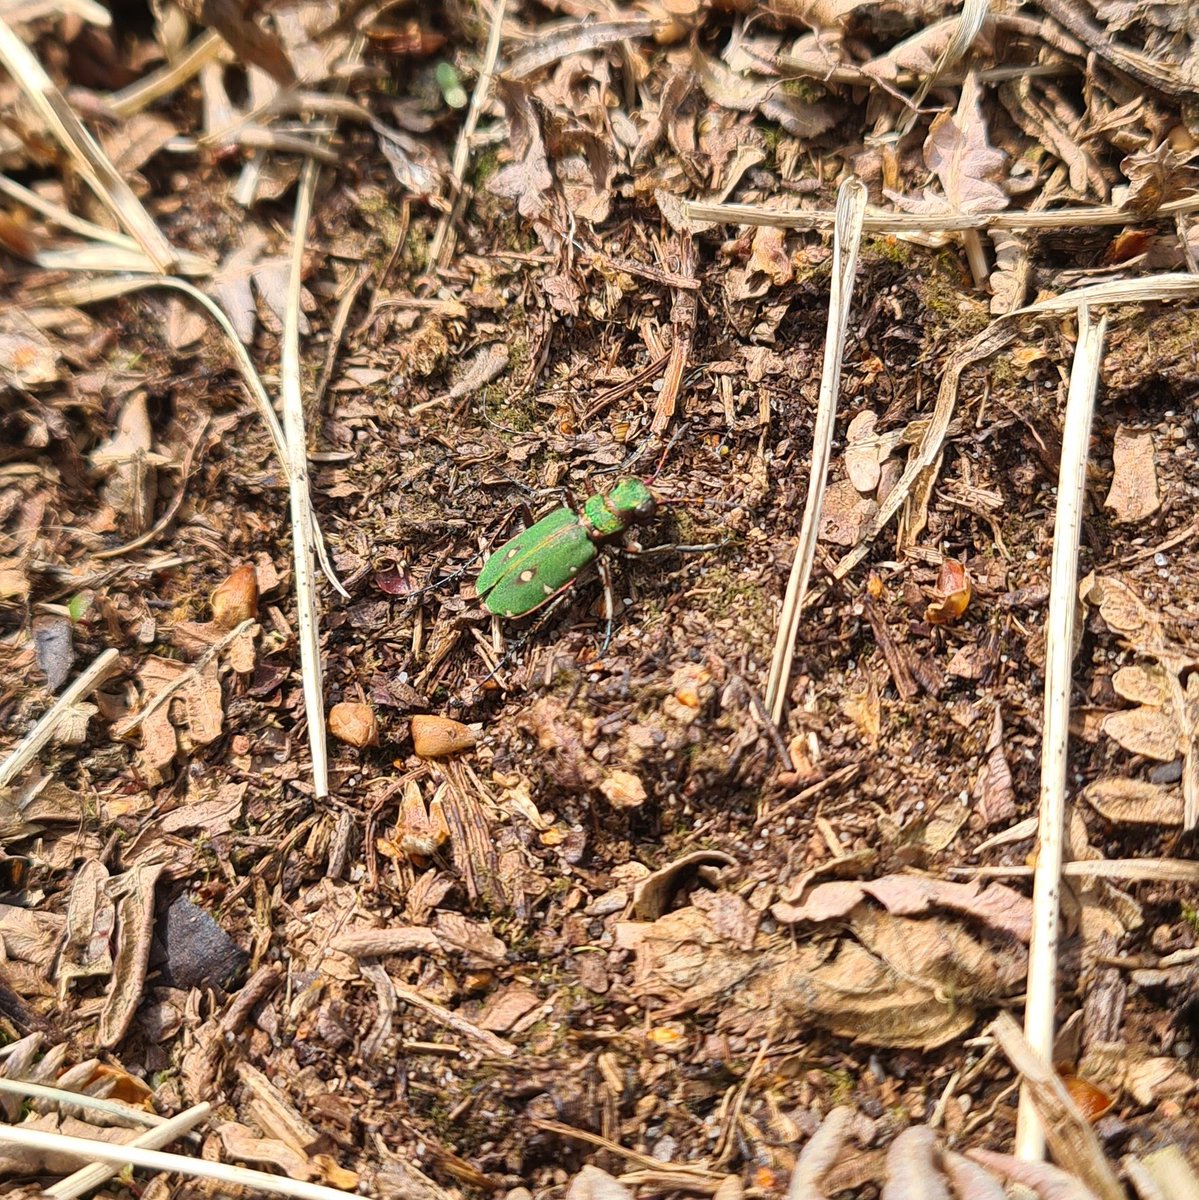 Green tiger beetle seen in Birmingham earlier this week. One of my favourite UK insects, isn't it gorgeous?! 💚